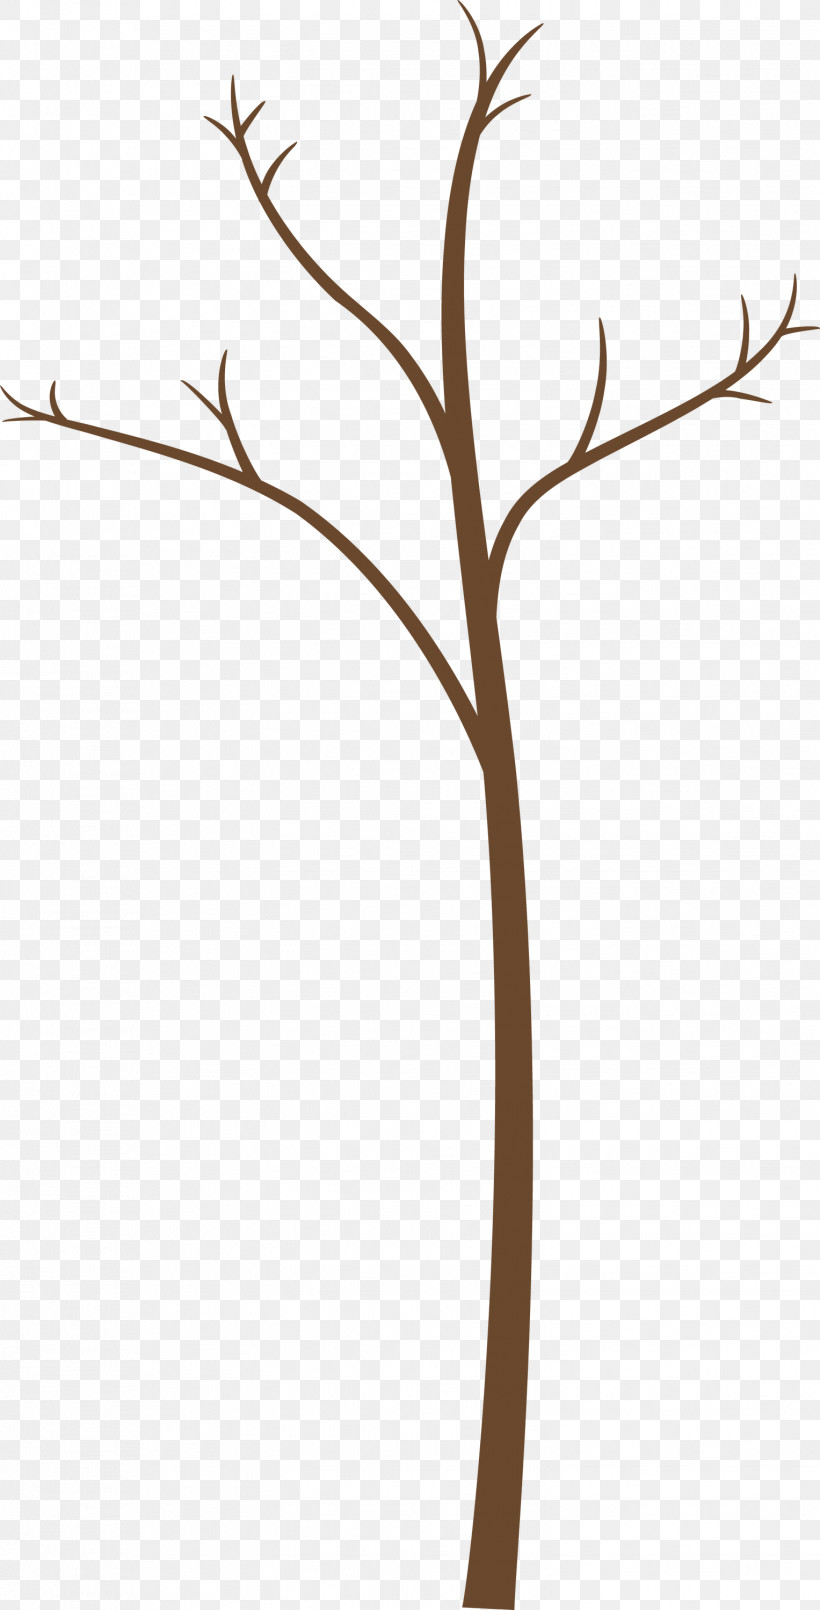 Branch Twig Leaf Plant Plant Stem, PNG, 1527x2999px, Abstract Tree, Branch, Cartoon Tree, Flower, Leaf Download Free